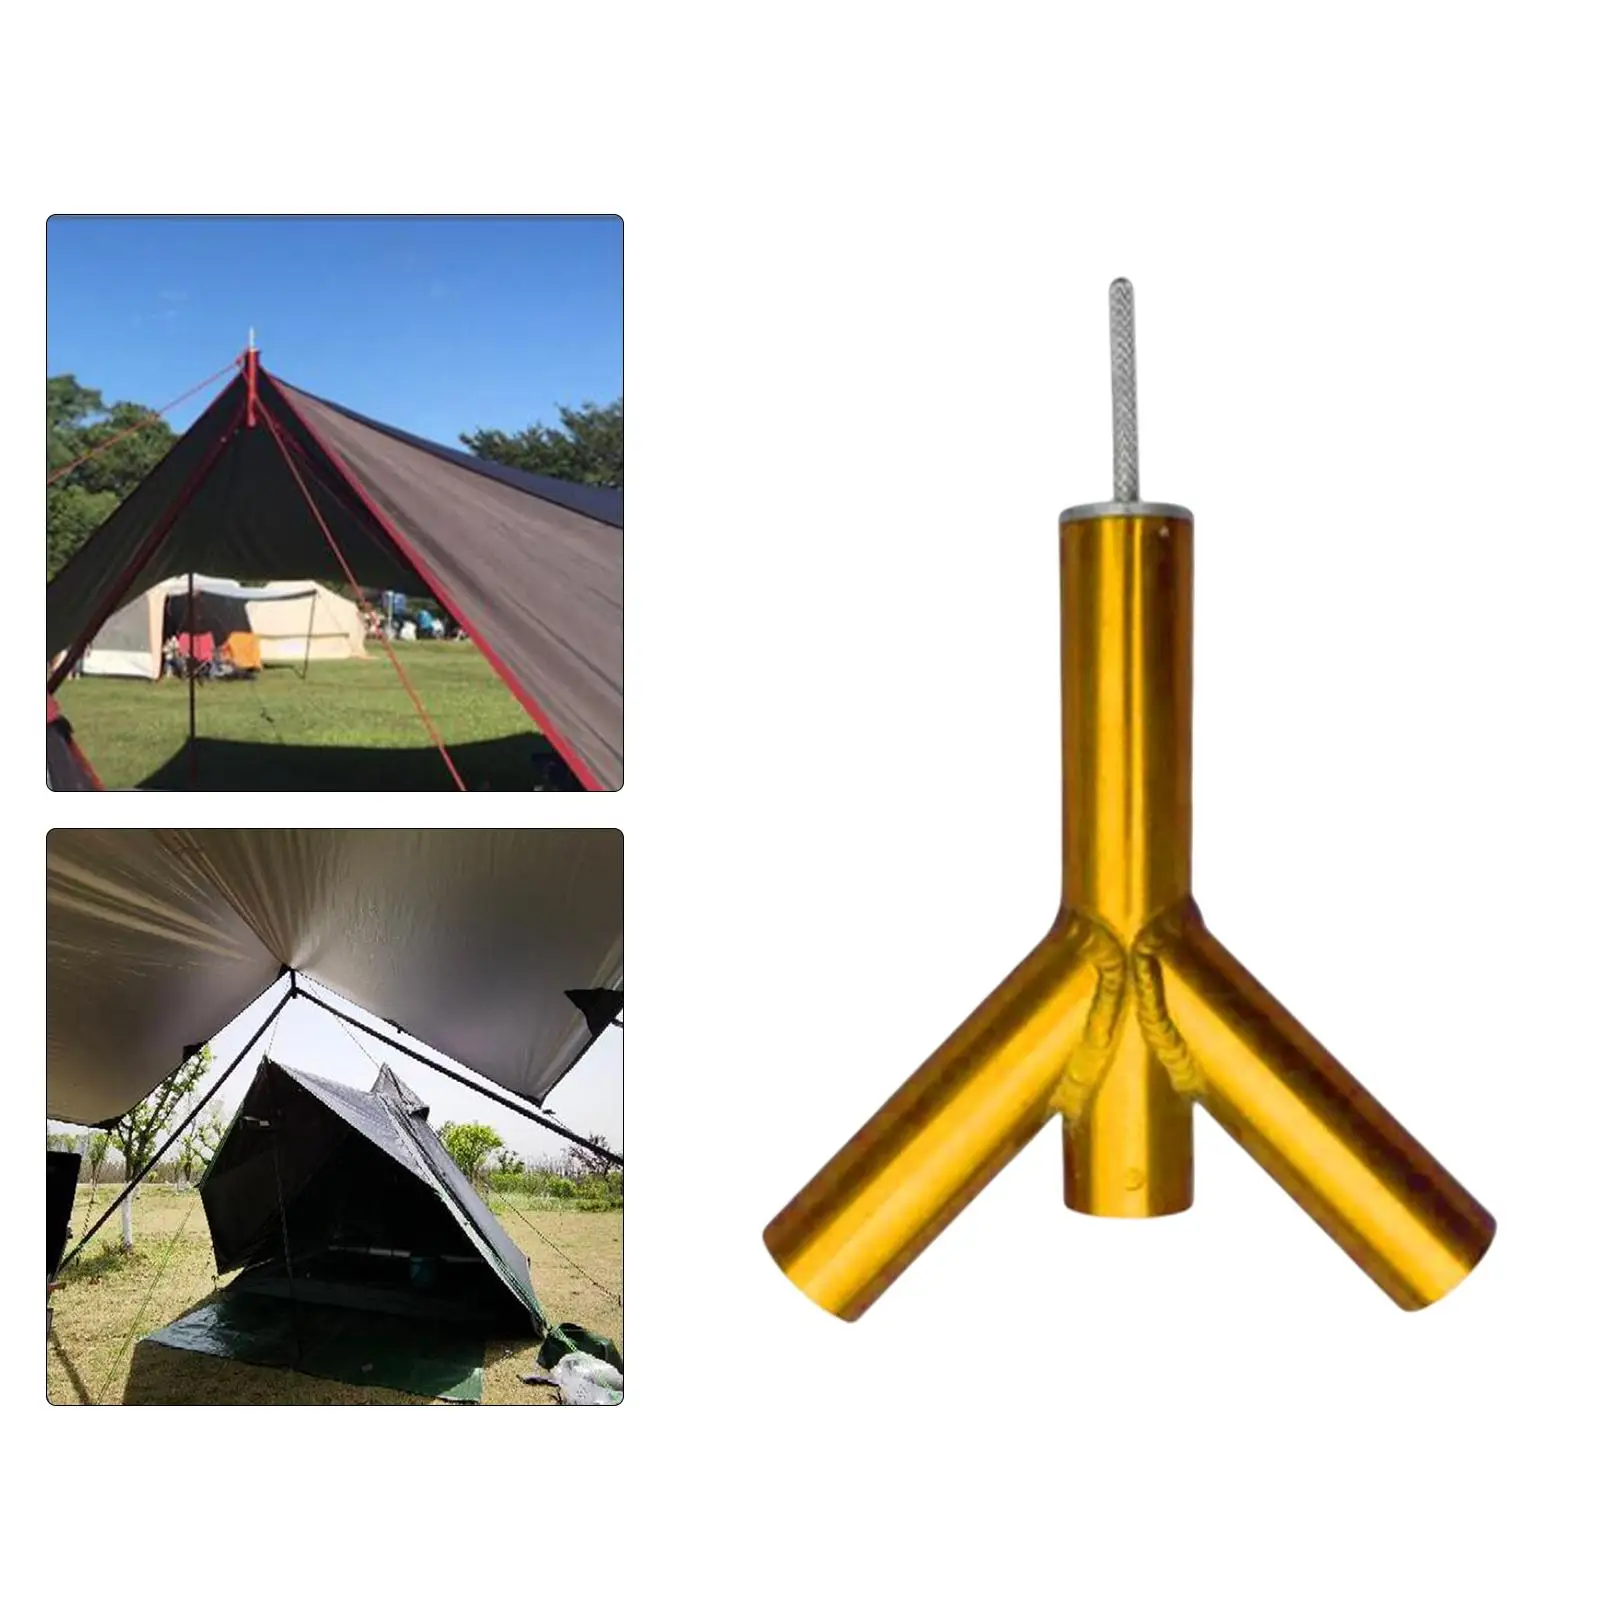 Portable Camping Tent Tarp Poles Canopy Awning Rod Support Replacement Shelters Stand Bar for Bimodal Tent Tent Fly Sunshade